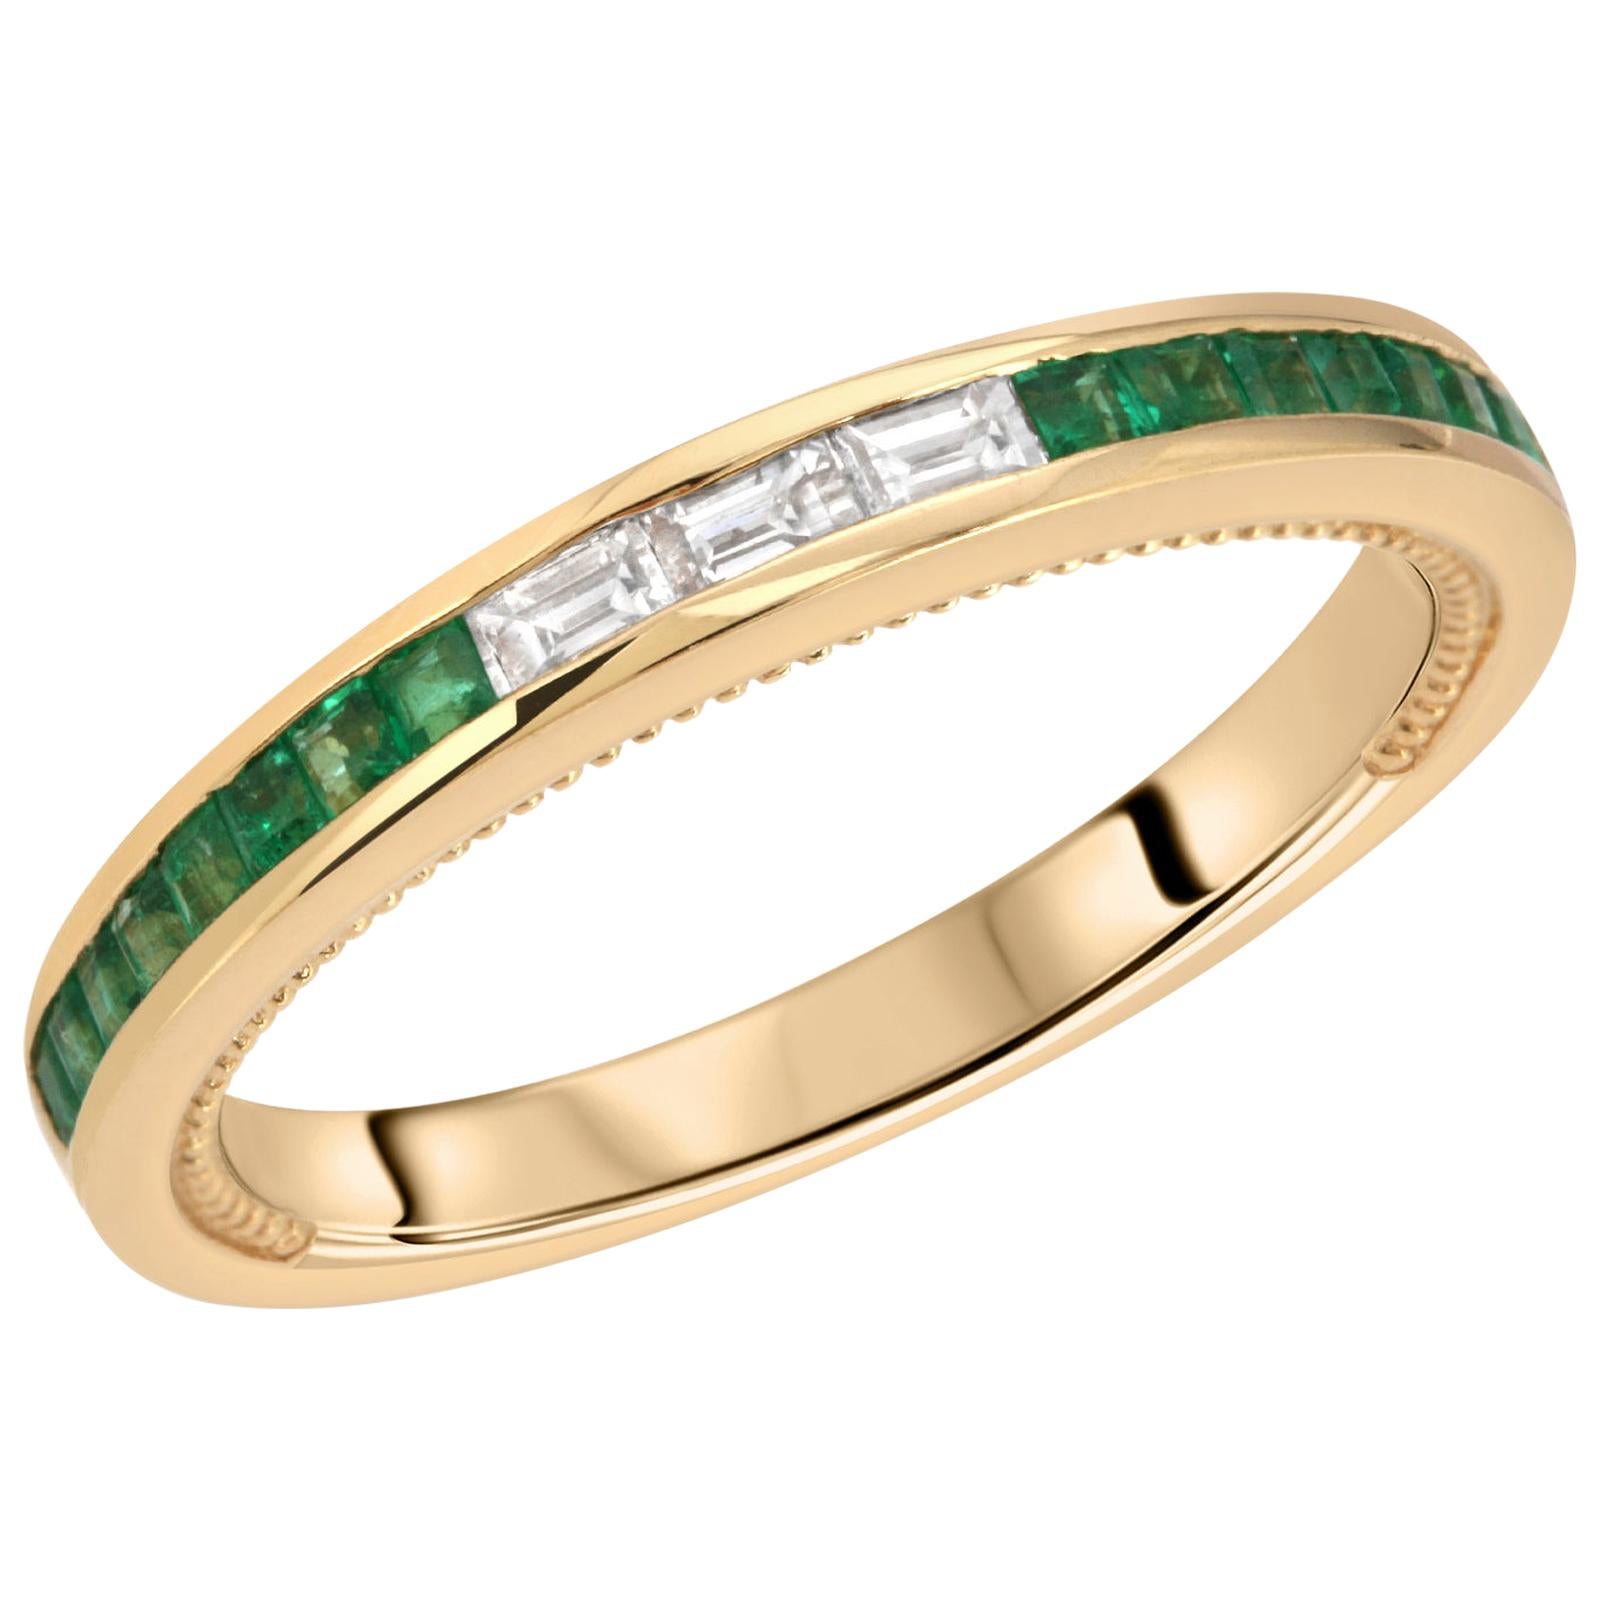 0.44 Carat Colombian Emerald and 0.15 Carat Diamonds in 18 Karat Gold Band Ring